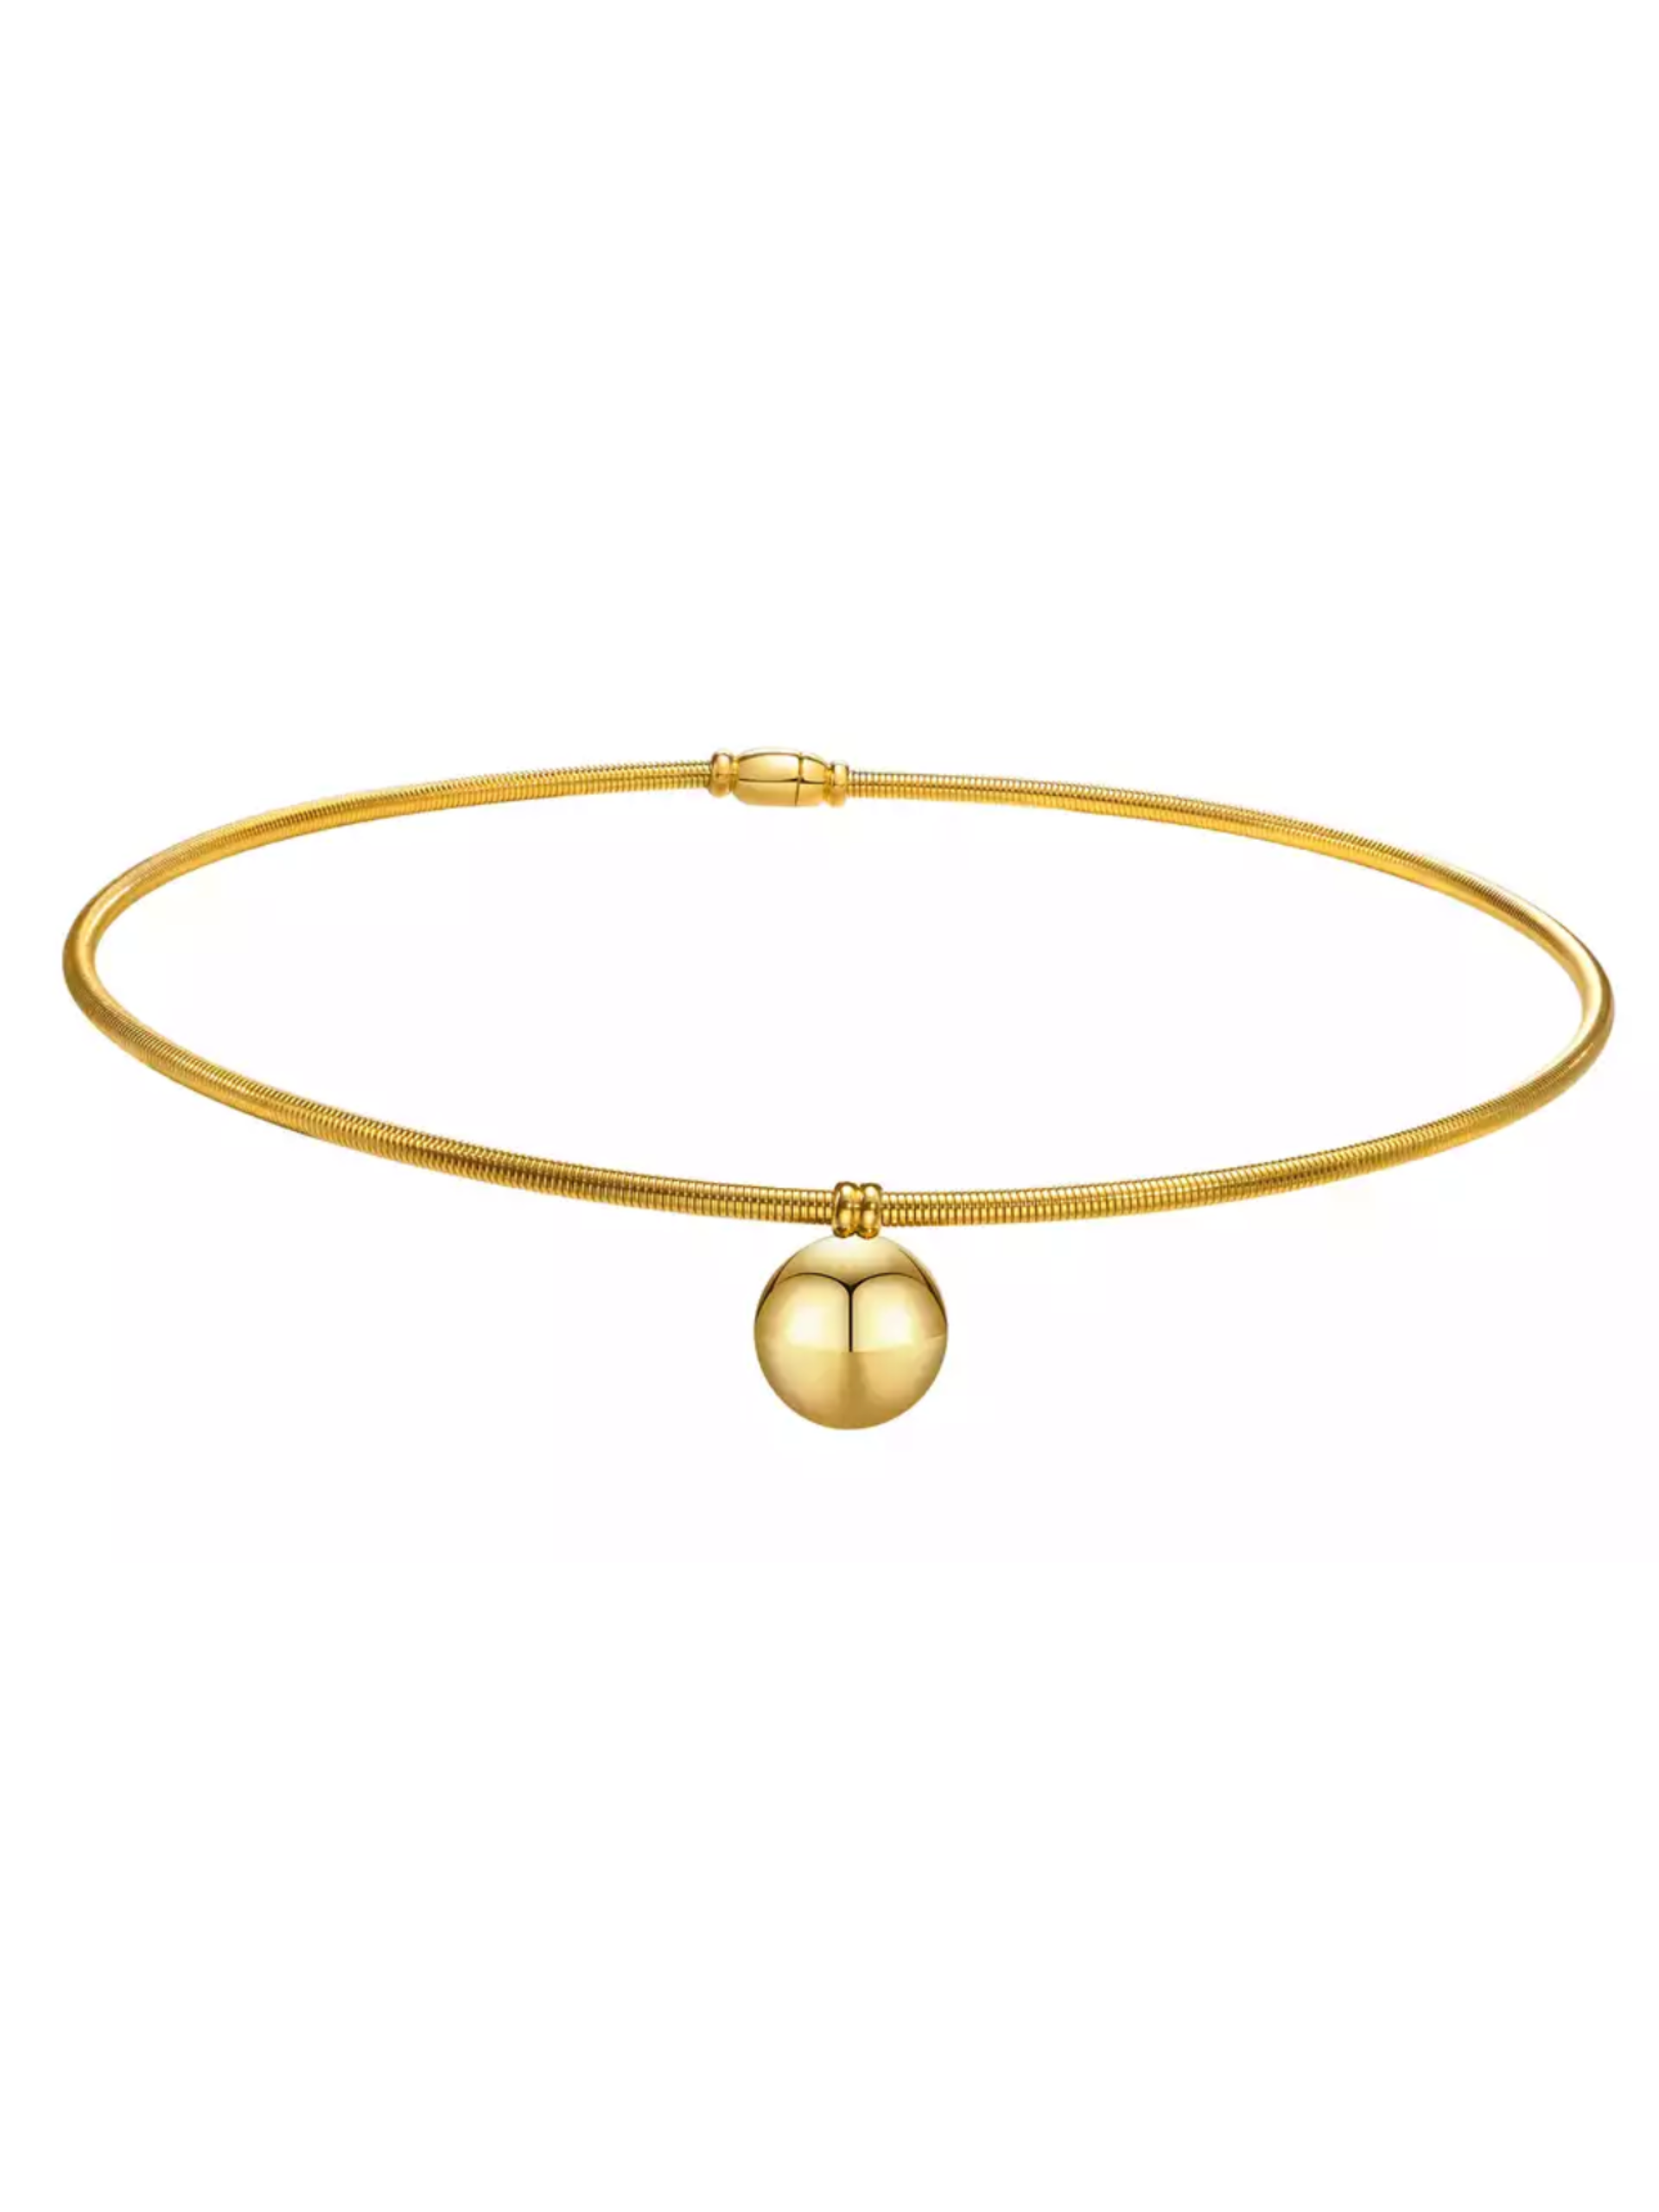 The sphere necklace - gold